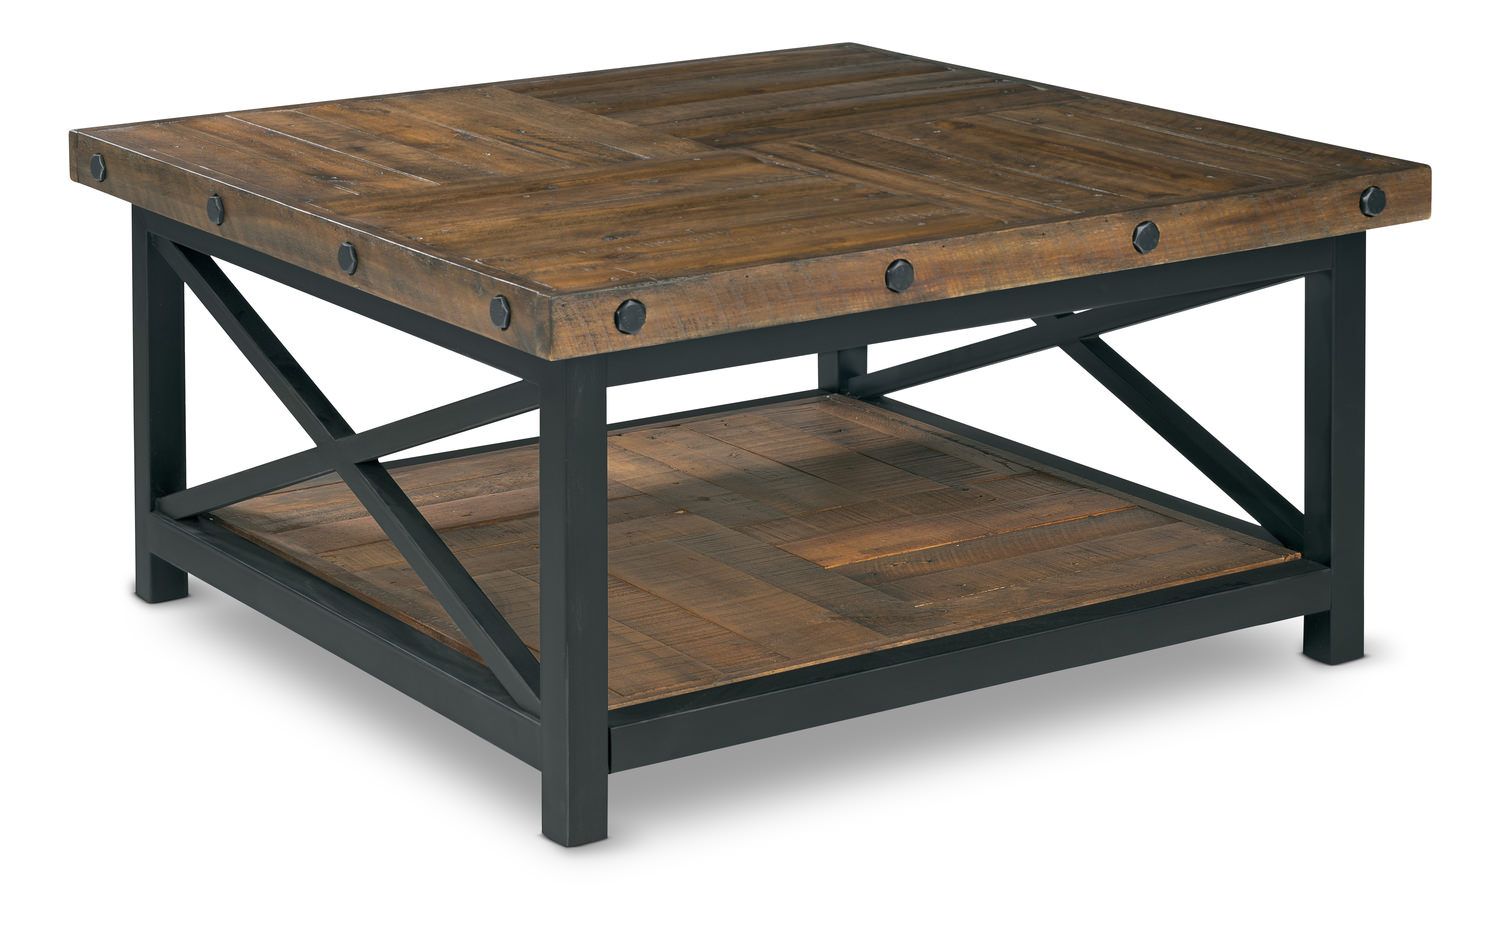 Carpenter Square Coffee Tableflexsteel | Hom Furniture Inside Transitional Square Coffee Tables (View 15 of 15)